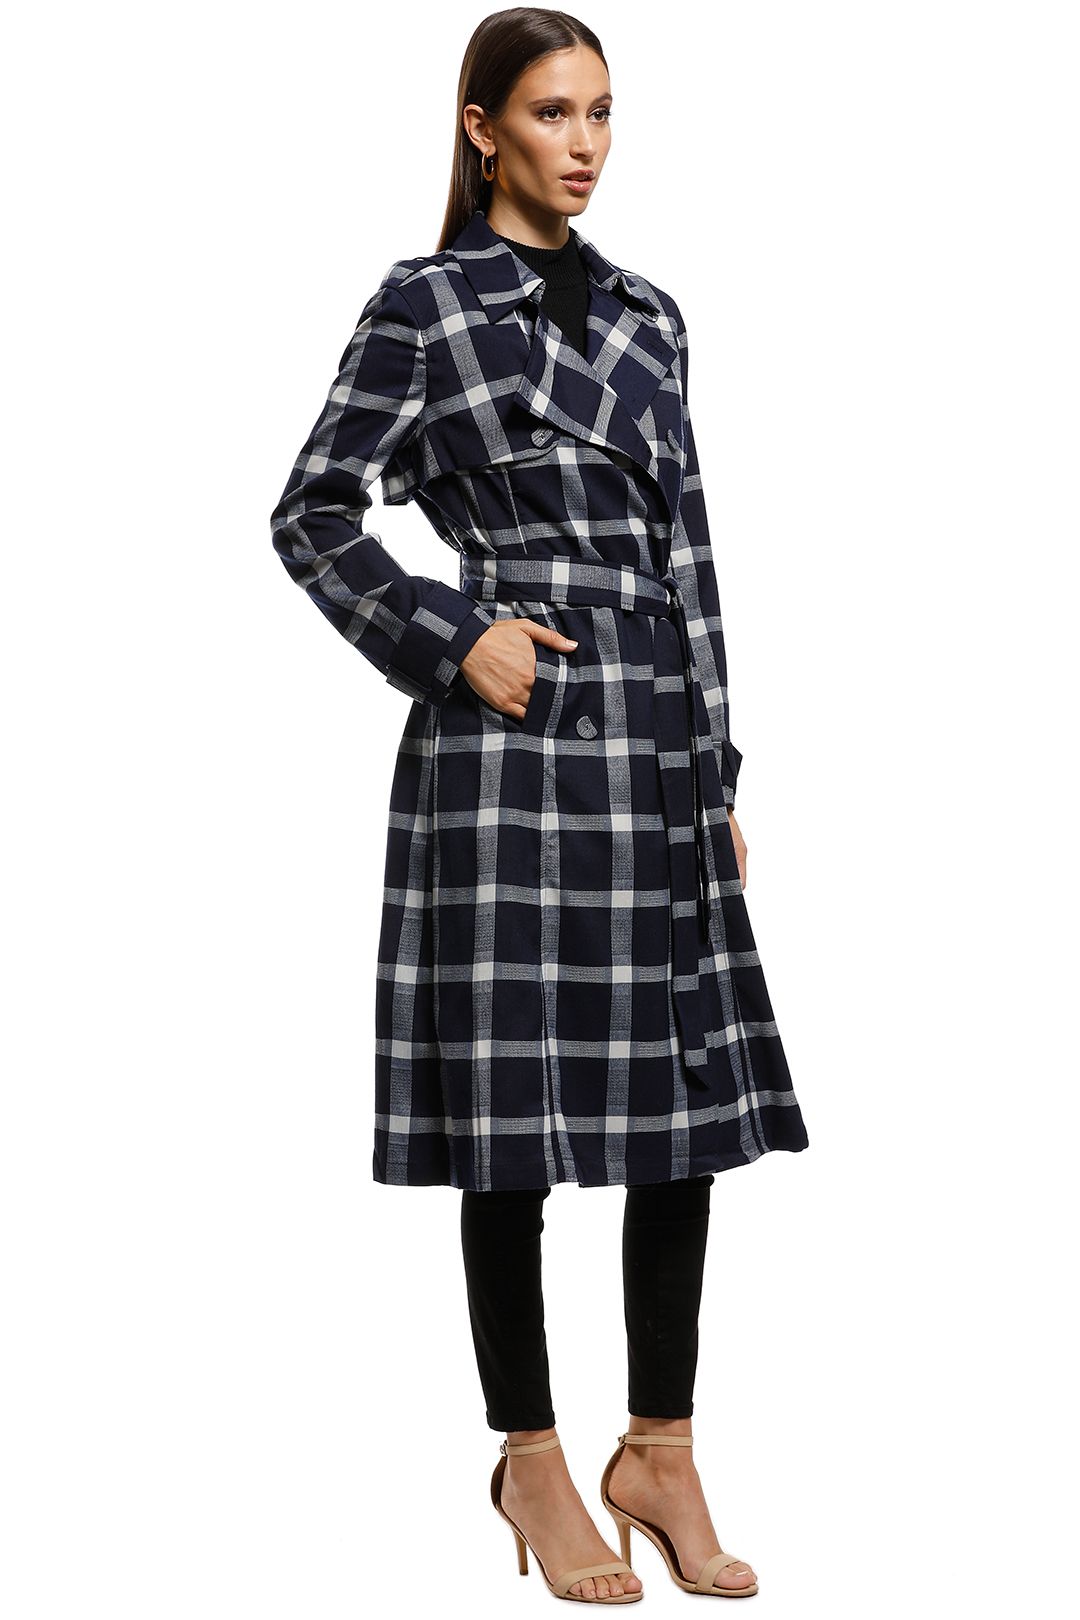 Indiana Trench Coat by Saints the Label for Hire | GlamCorner